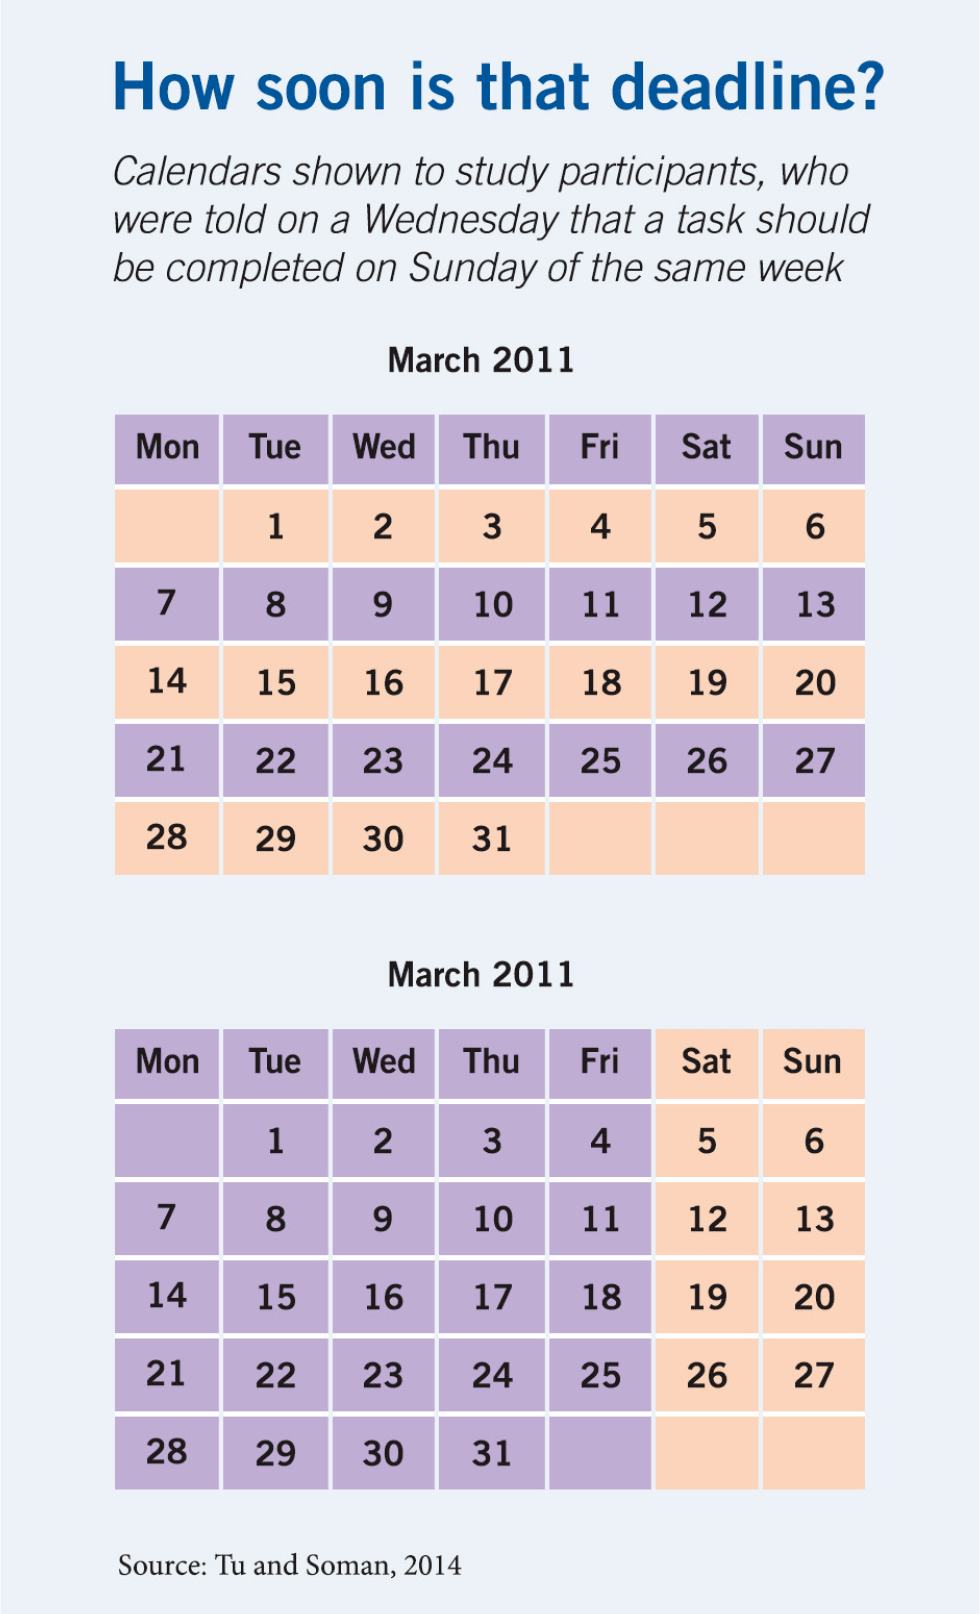 A diagram showing two color-coded views of the thirty-one-day calendar grid for the month of March 2011, with the top row labeling the days of the week starting with Monday and ending with Sunday. The first view uses two colors to shade each seven-day row in an alternating pattern. The second view uses one color for weekdays and the other weekend days, resulting in the first five columns being one color, and the two columns on the right in the other color.